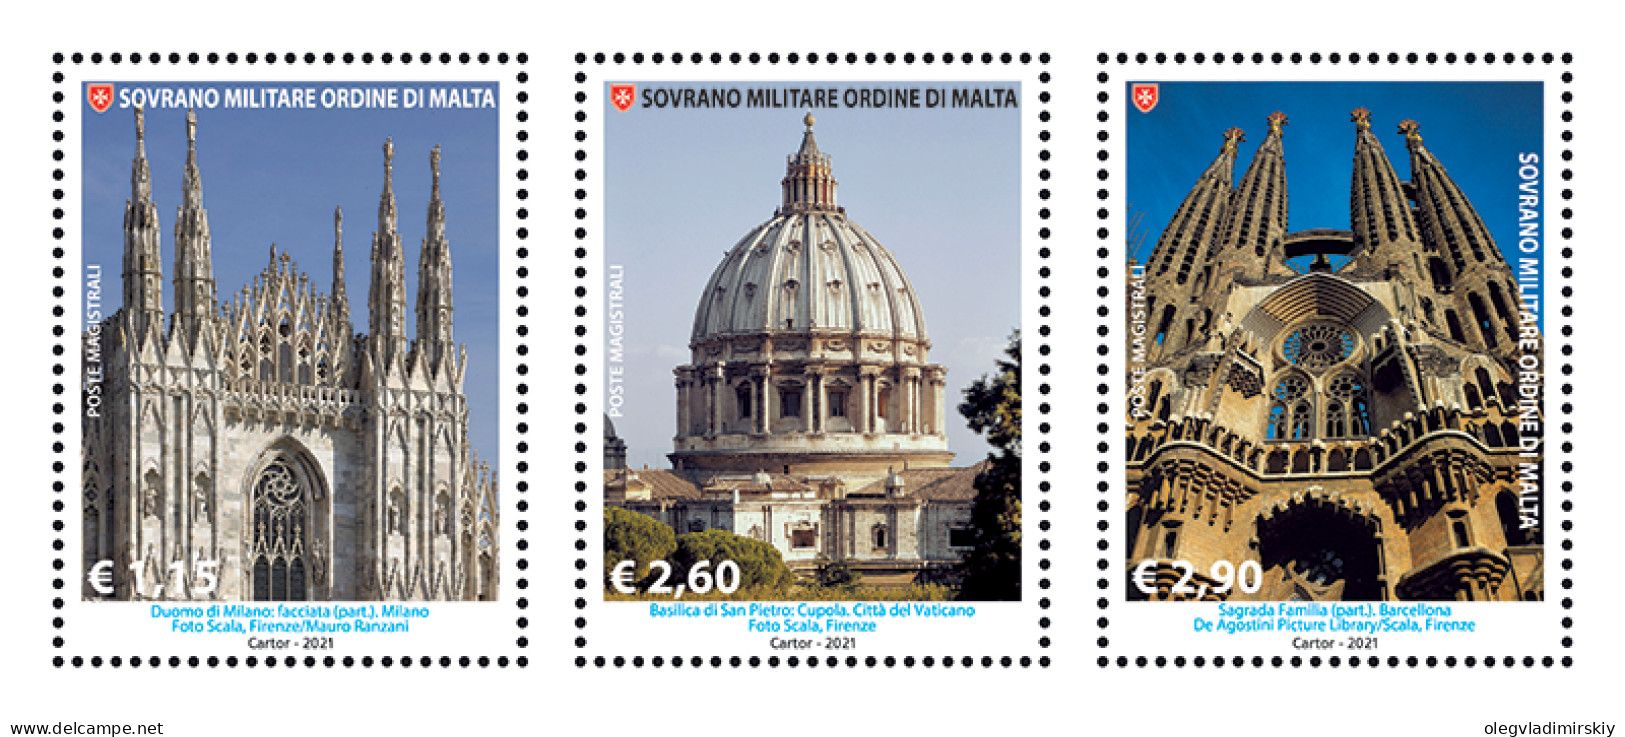 SMOM Order Of Malta 2021 Famous Cathedrals Milan Vatican Barcelona Set Of 3 Stamps MNH - Churches & Cathedrals